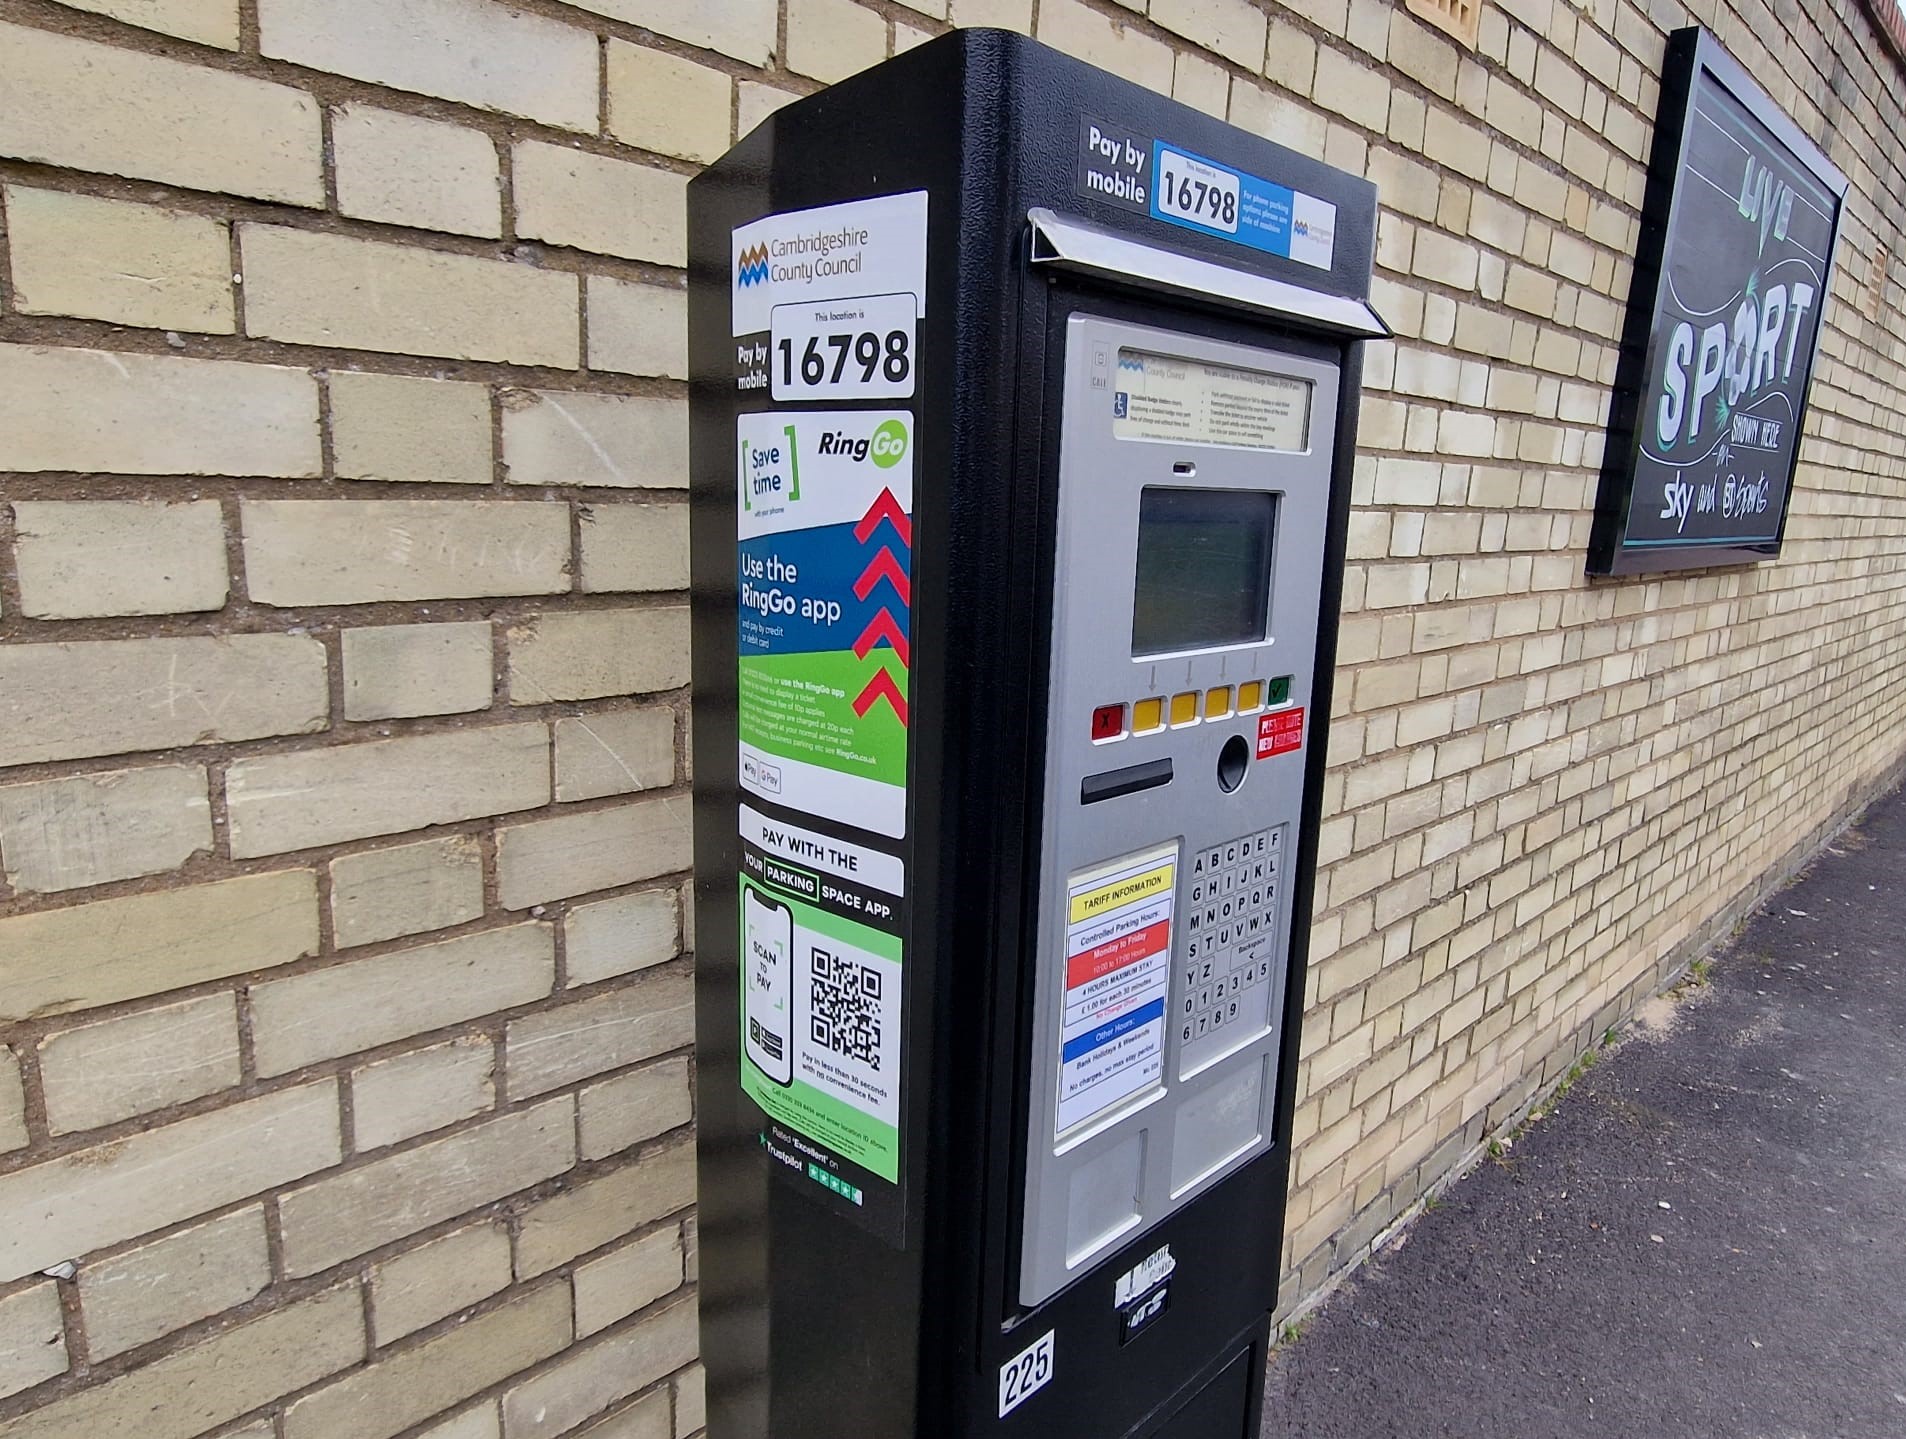 Flowbird UK’s mobile parking payment solution - YourParkingSpace - has been selected for deployment by Cambridgeshire County Council.